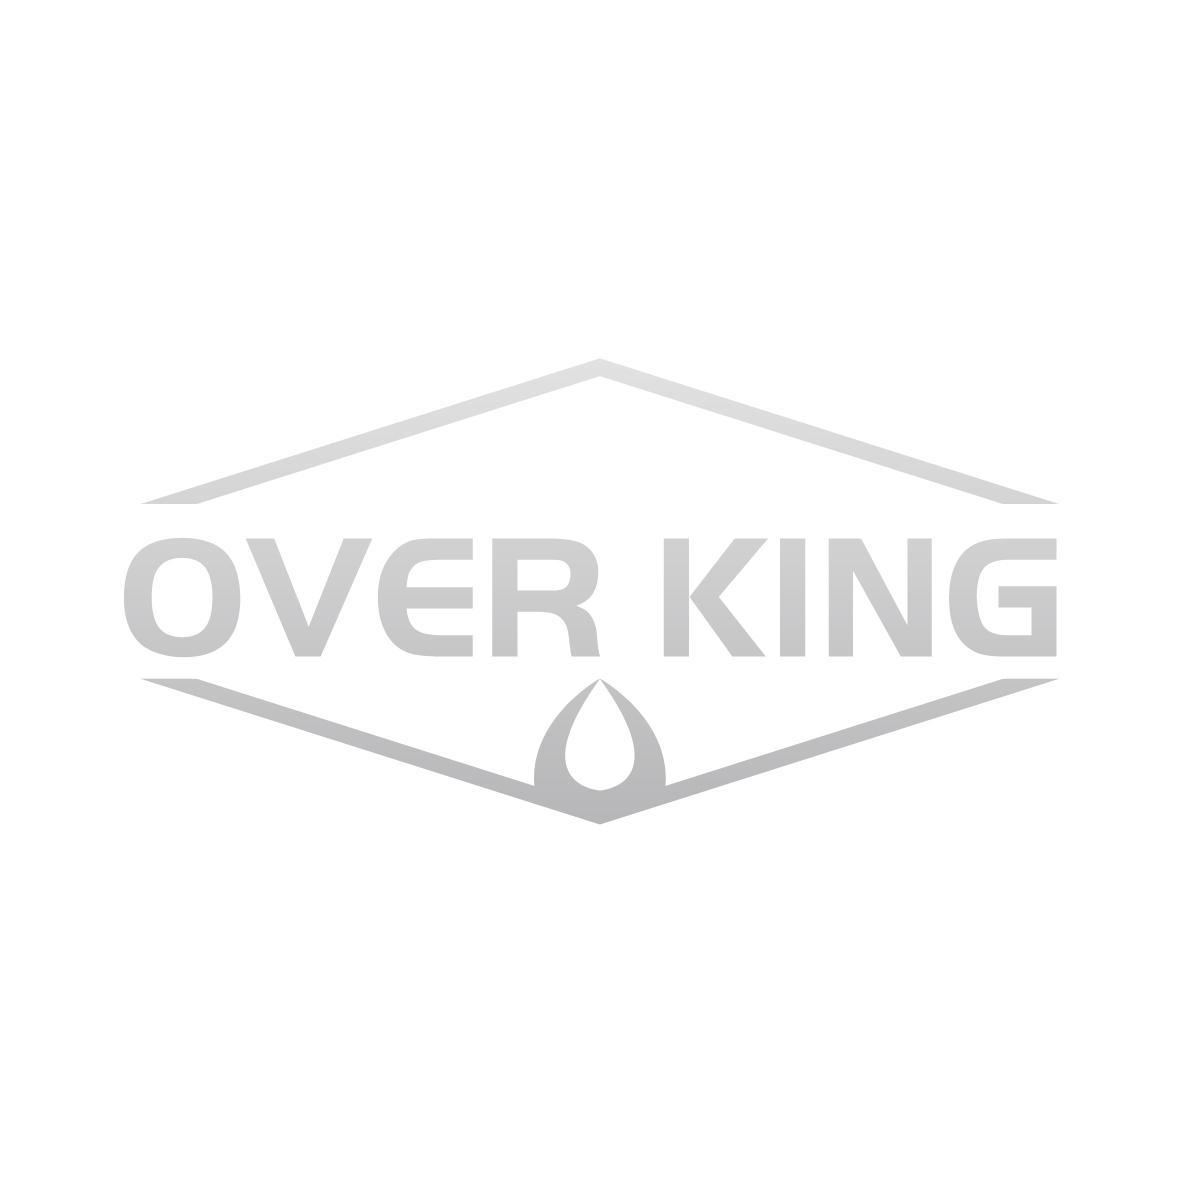 OVER KING